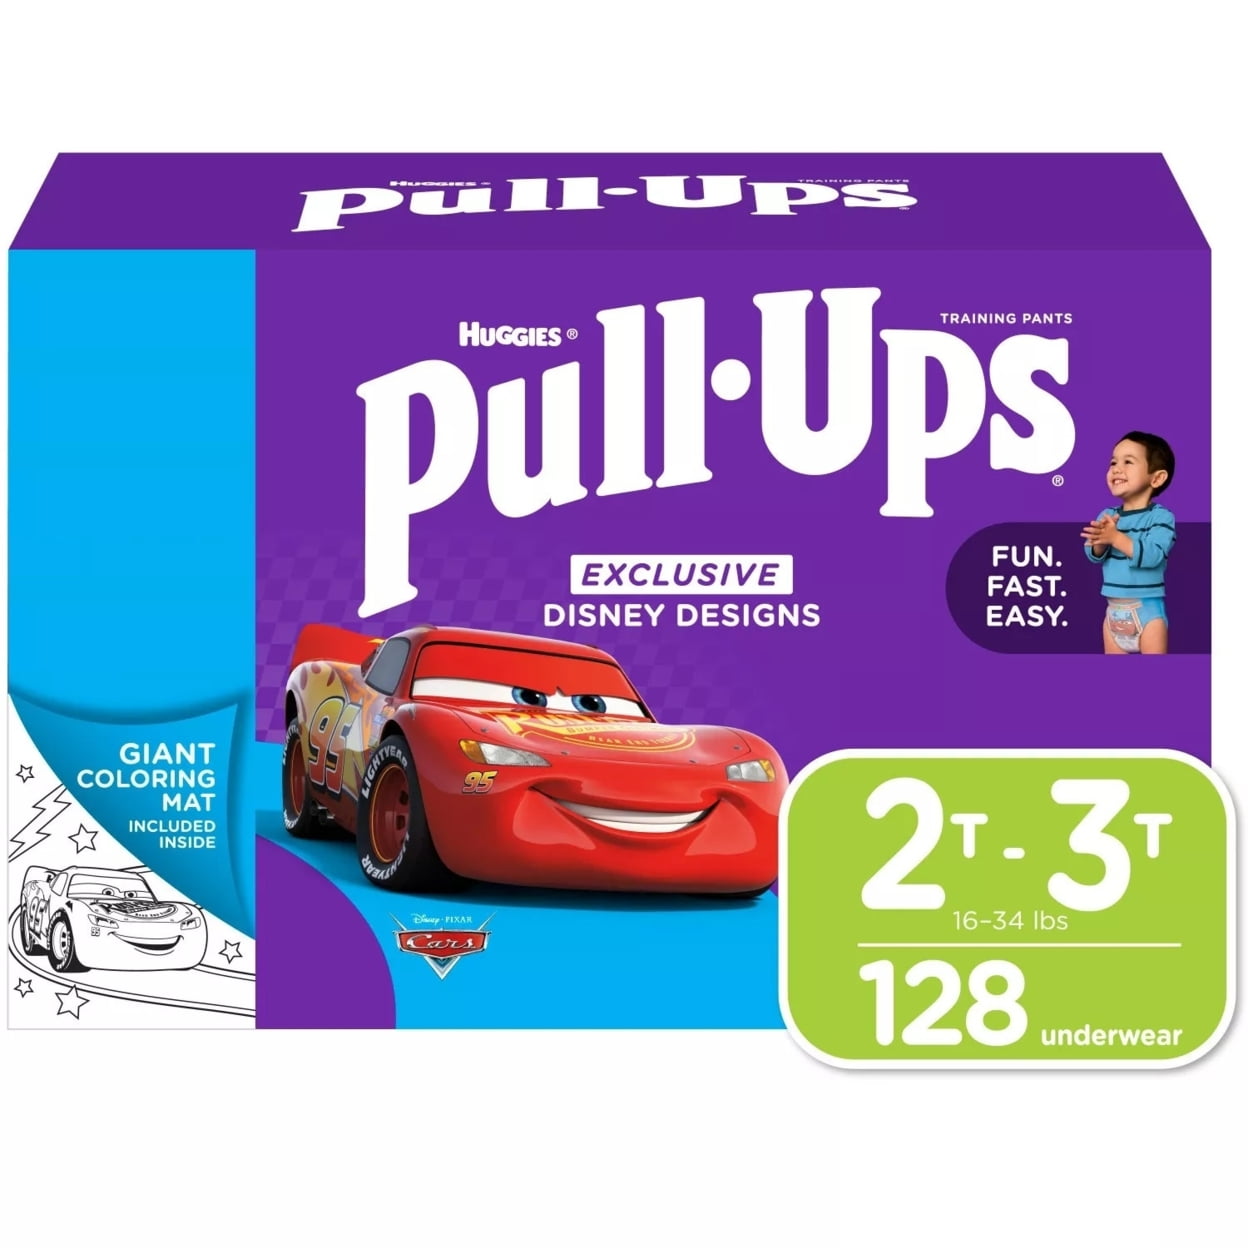 Huggies Pull-Ups Training Pants for Girls, Size 2T-3T (18-34 lbs.)